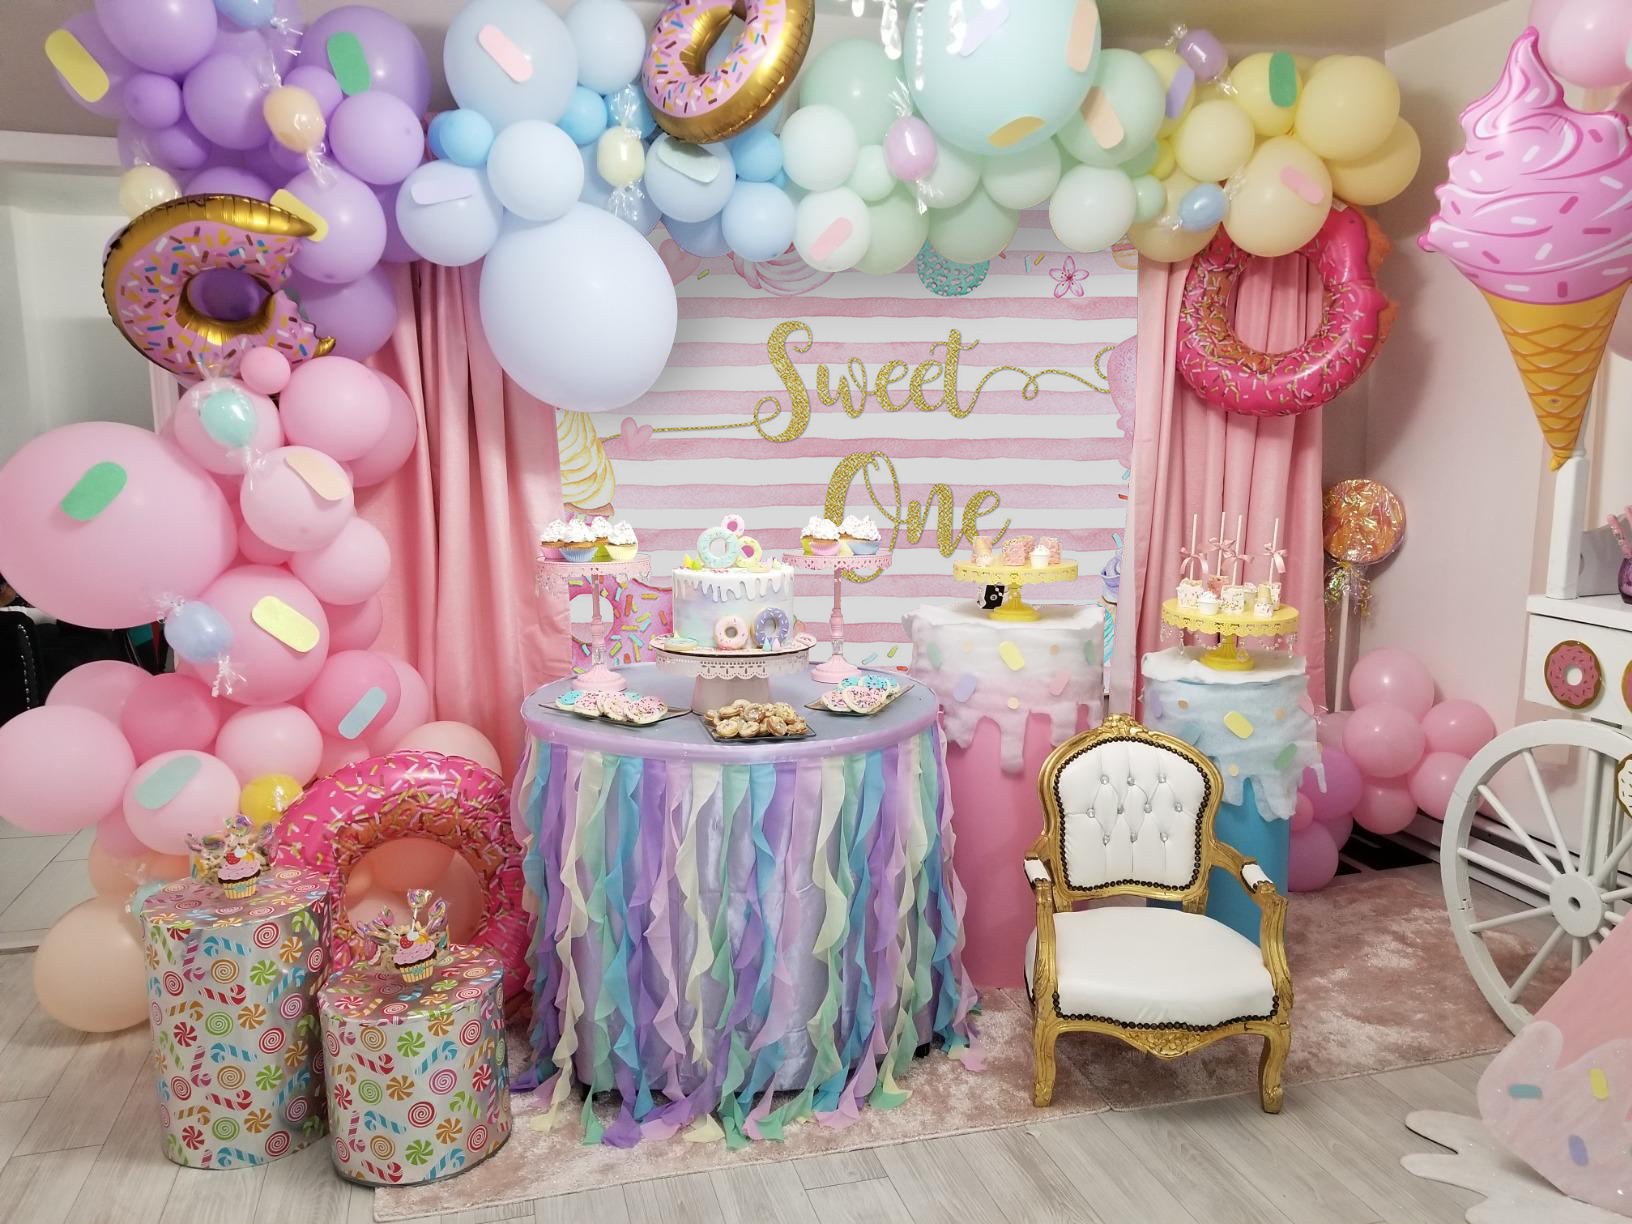 Mocsicka Sweet One Back Drop Donut Ice Cream and Dessert First Birthday Party Decor-Mocsicka Party